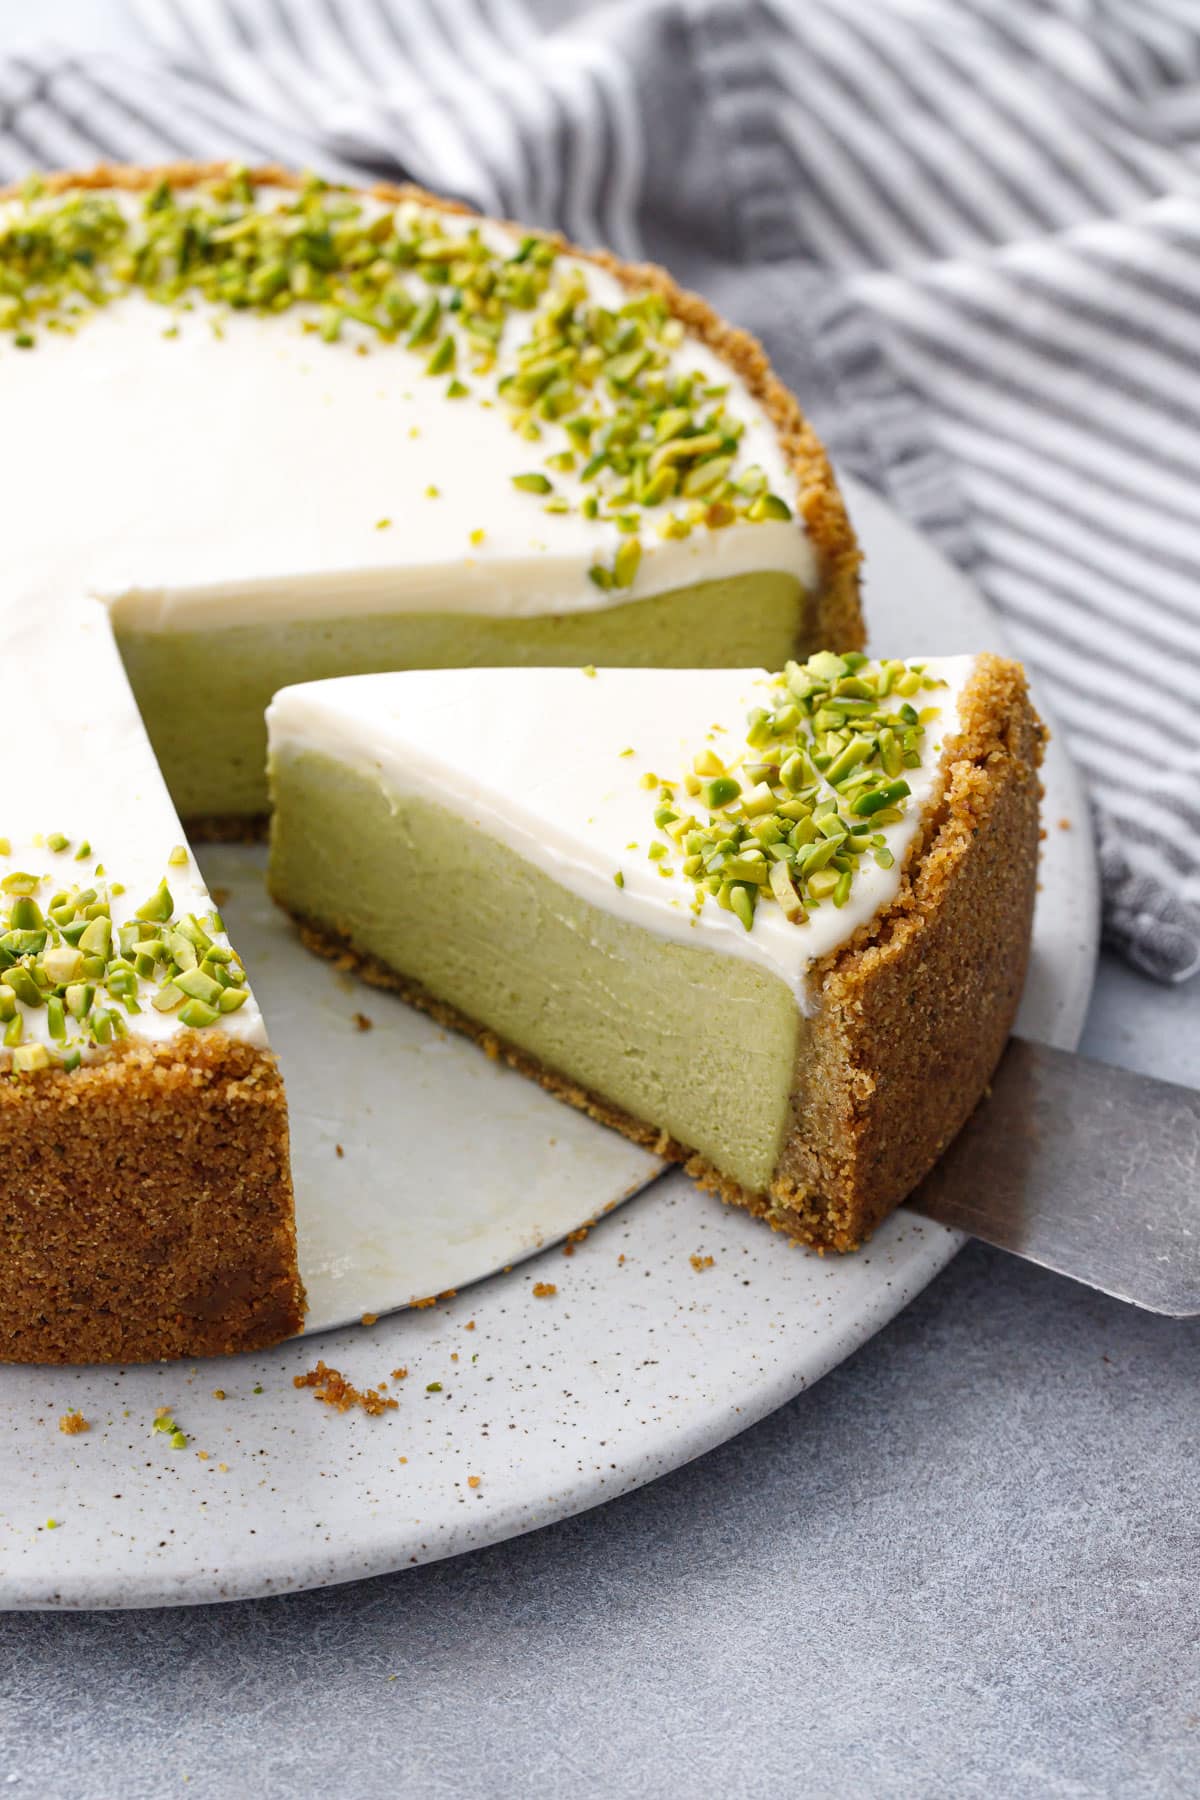 Slice of Pistachio Sour Cream Cheesecake on a cake plate with cake server, topped with a layer of white sour cream and a border of green chopped pistachios.